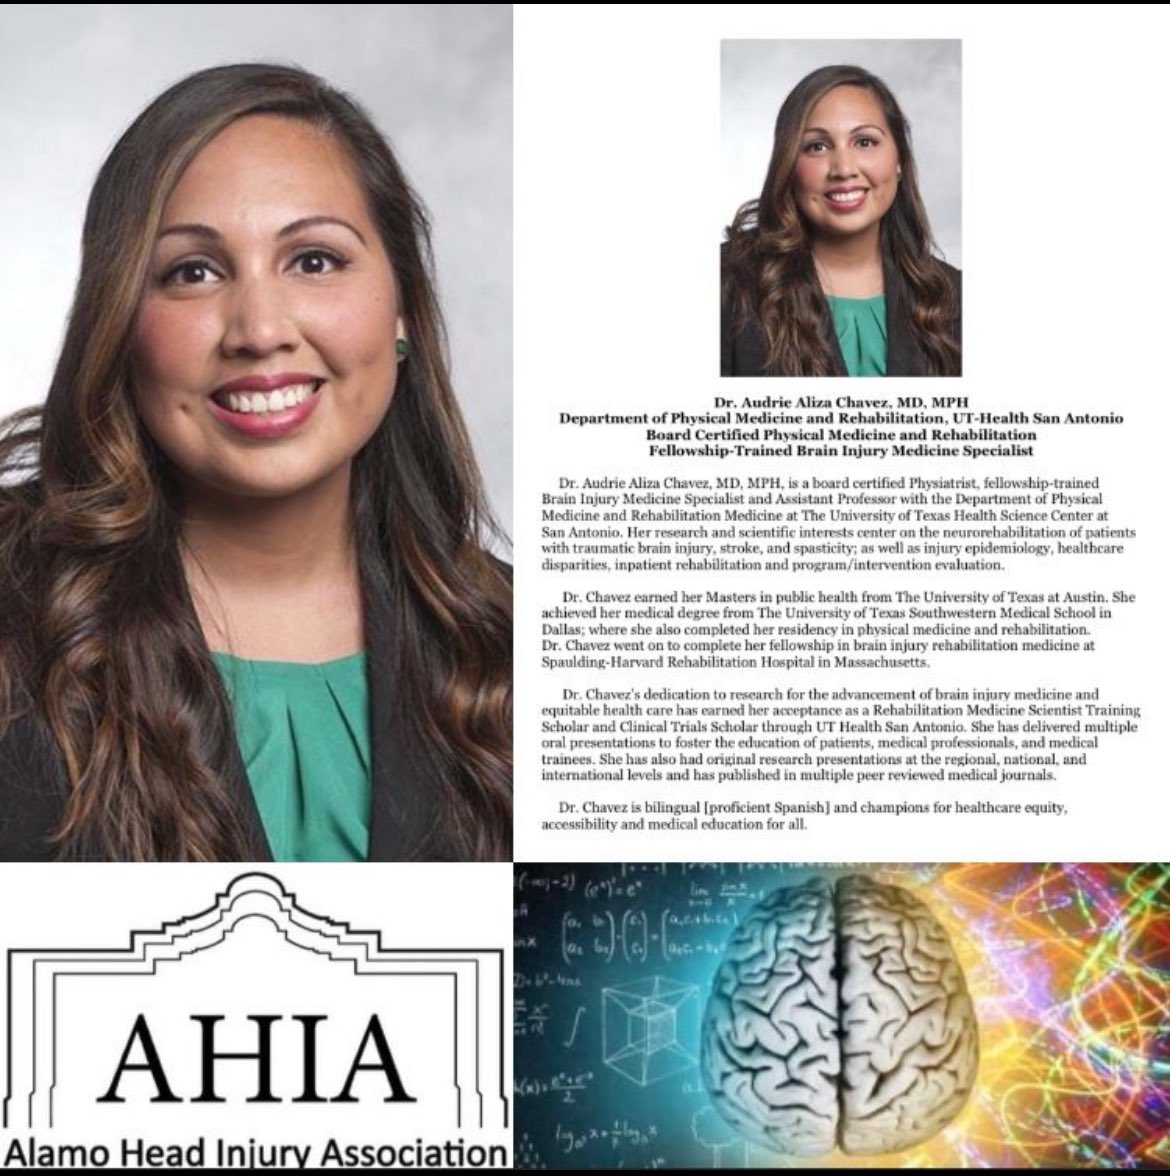 My wonderful colleague from @UTHSA_RehabMed, Dr. Chavez @audriechavezmd, will be one of the distinguished speakers at the 23rd Annual Brain Injury Symposium hosted by the Alamo Head Injury Association & sponsored by @PAMHealth1. #BrainInjuryAwarenessMonth